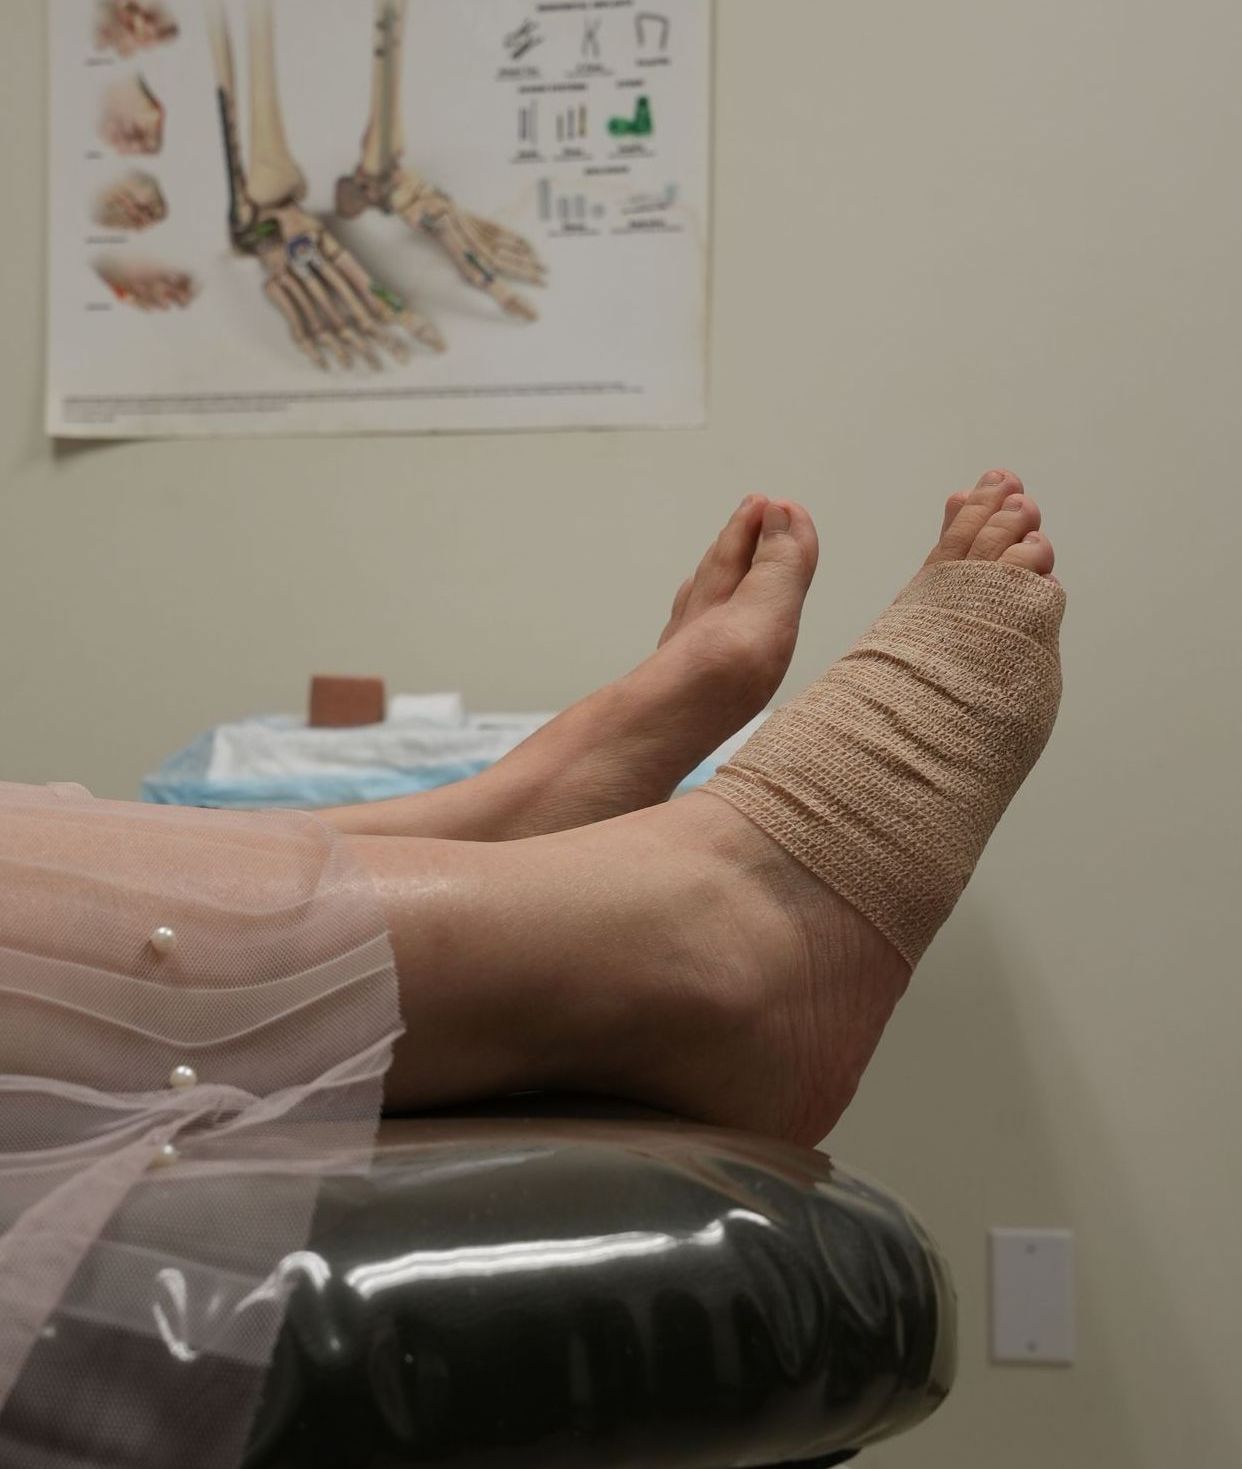 FOOT AND ANKLE NONSURGICAL TREATMENT